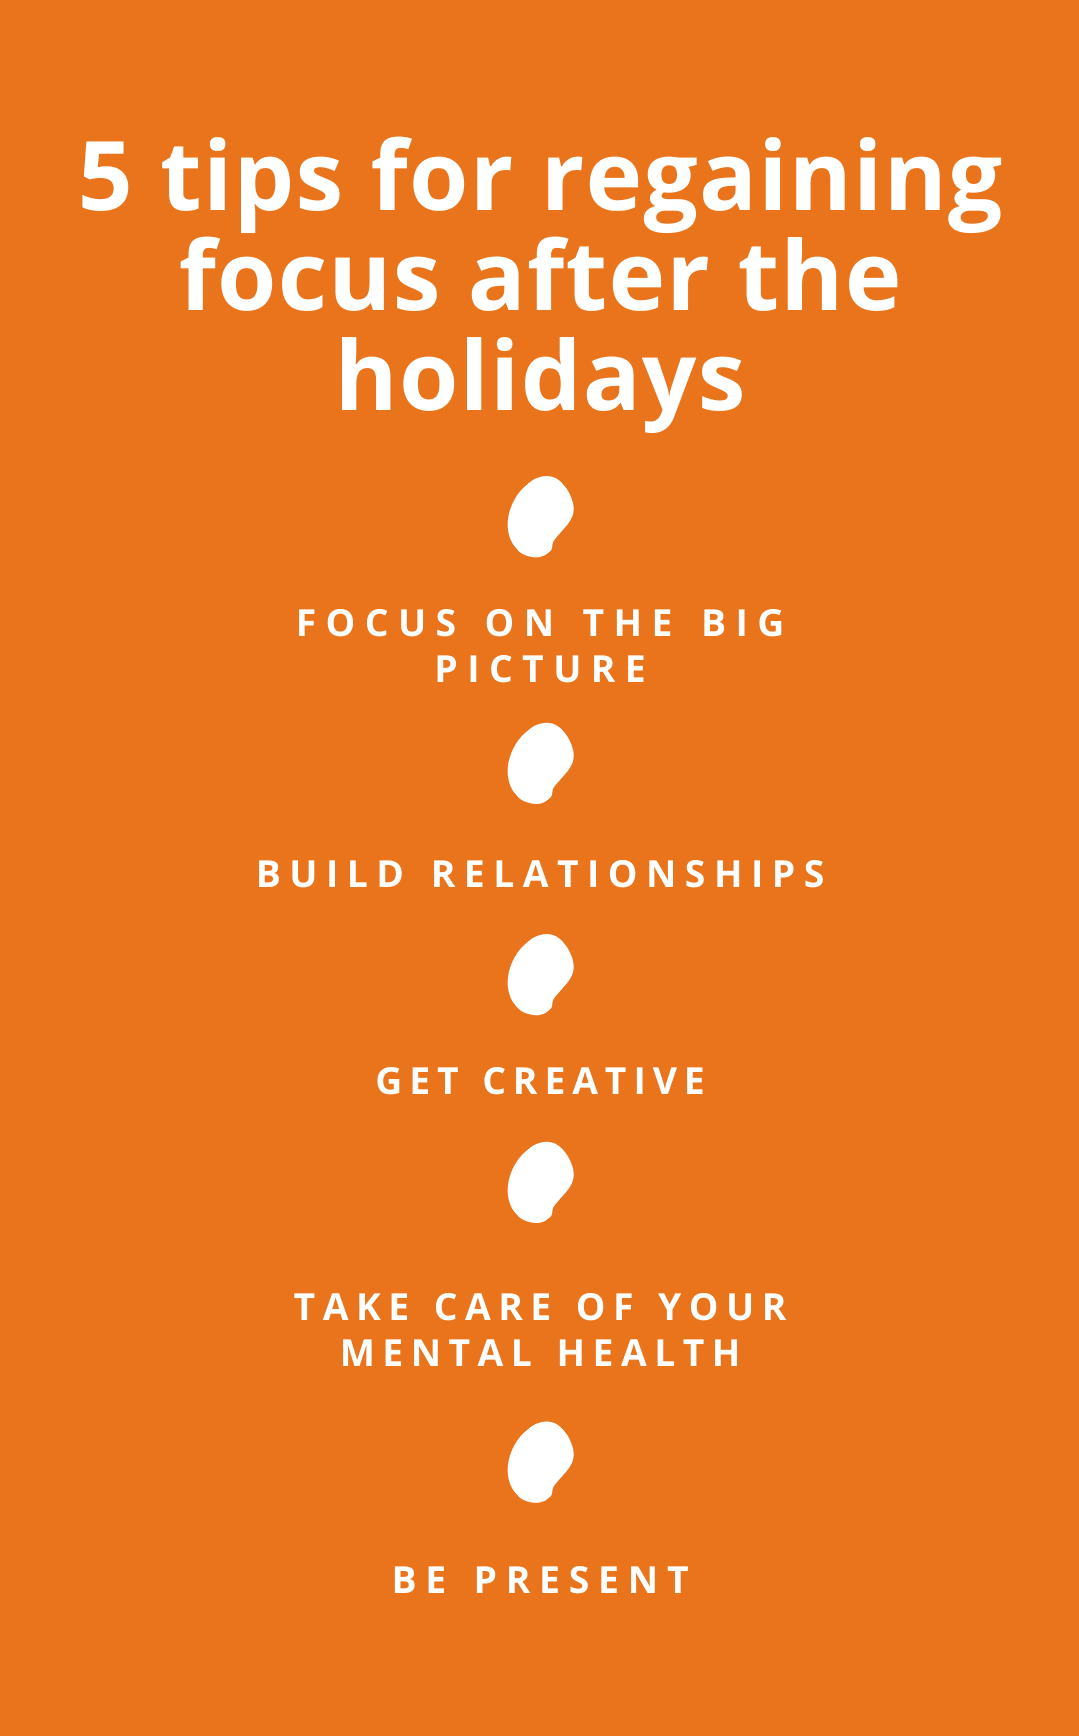 5 tips for regaining focus after the holidays (1)